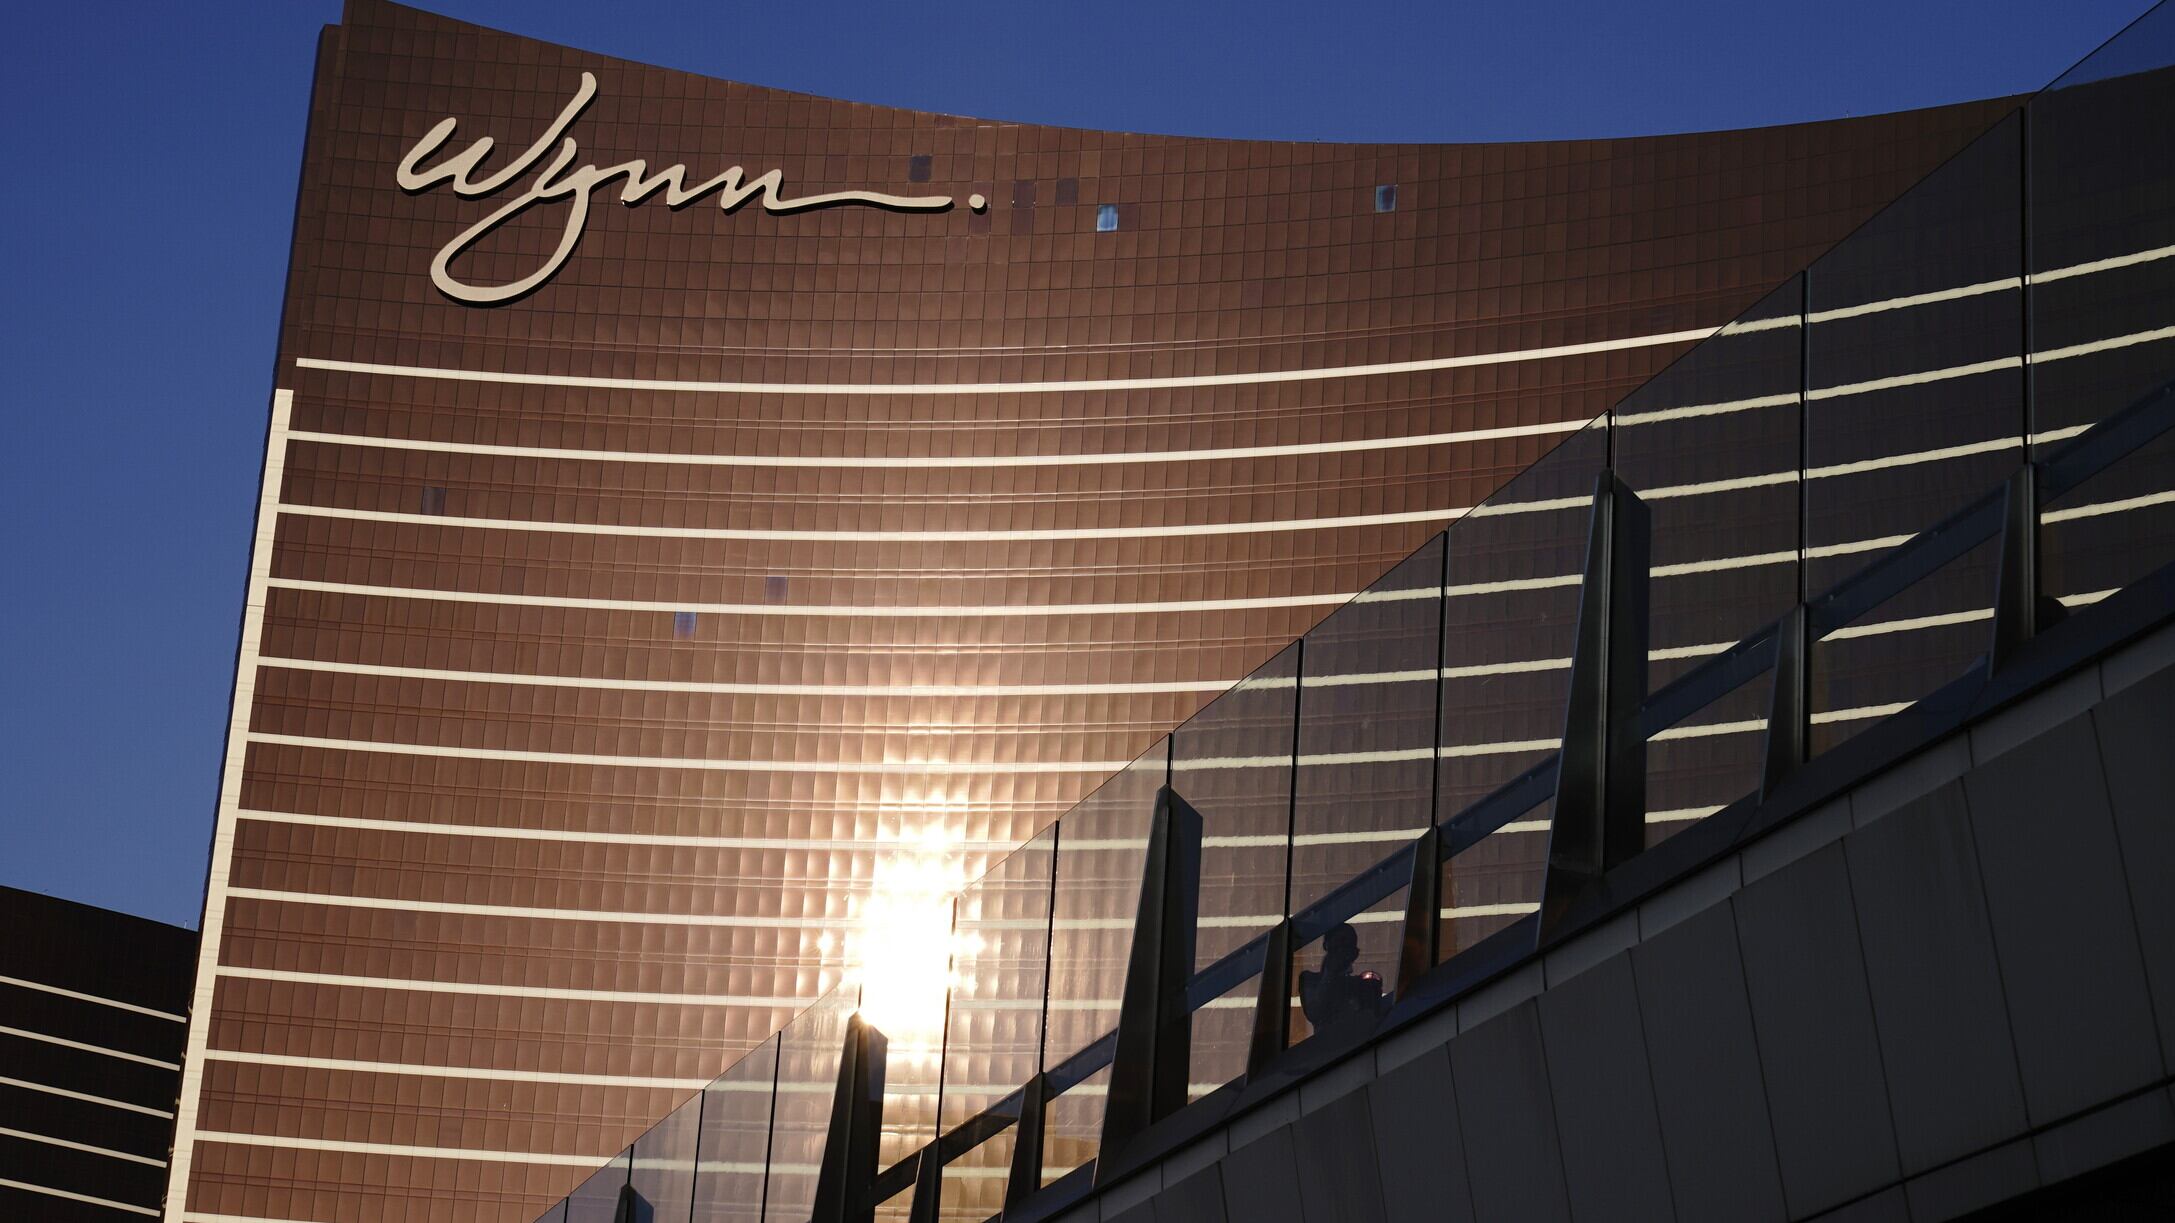 Wynn Resorts was the last of the major employers to reach agreement with hospitality workers (AP Photo/John Locher, File)